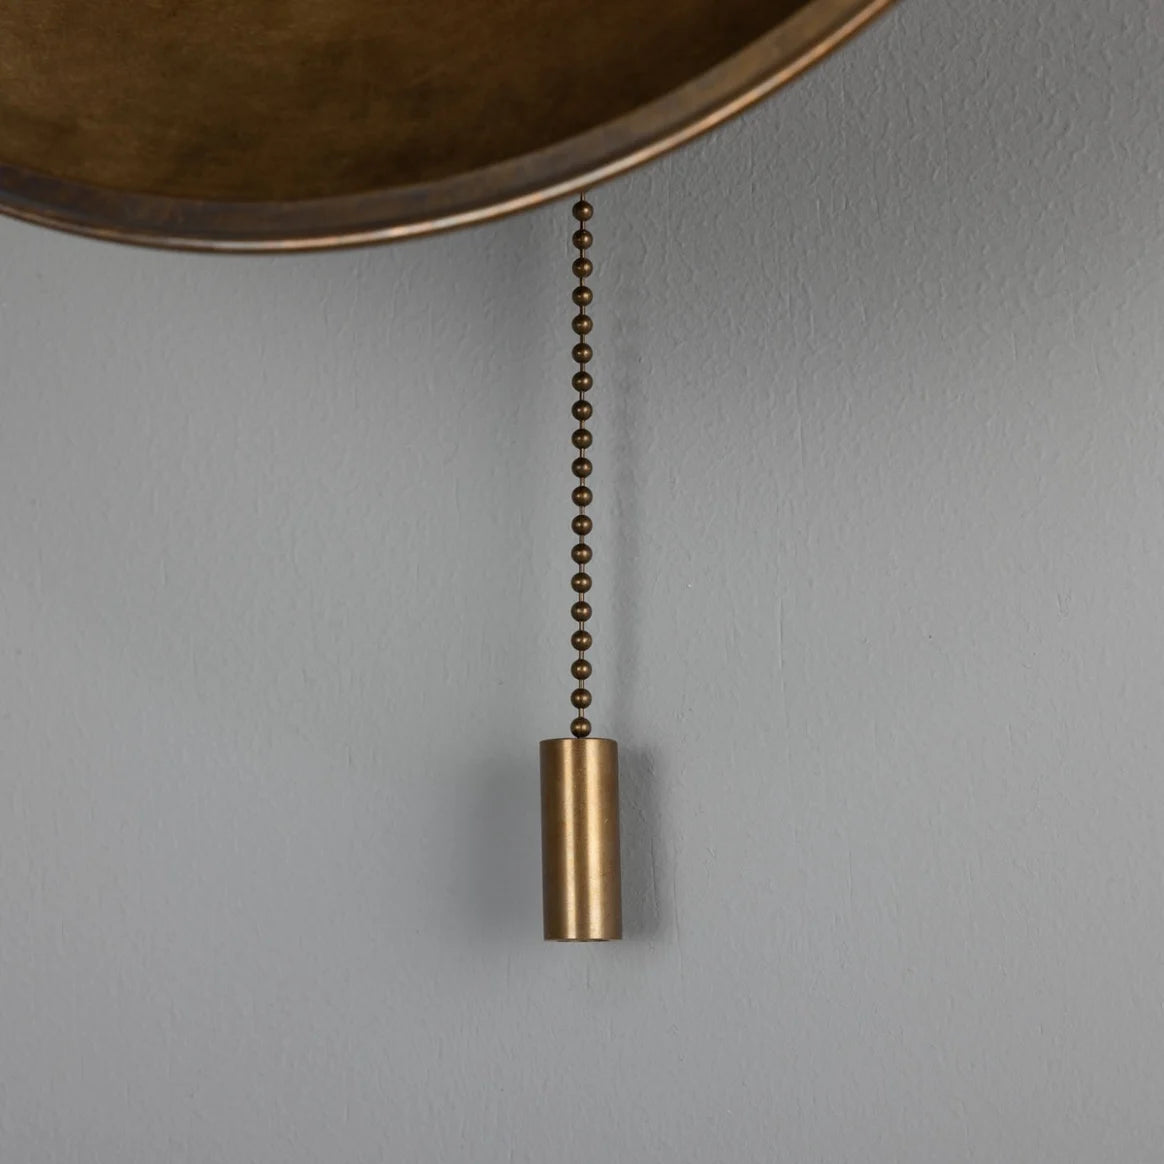 Marrakesh Art Deco Wall Light with Pull Chain